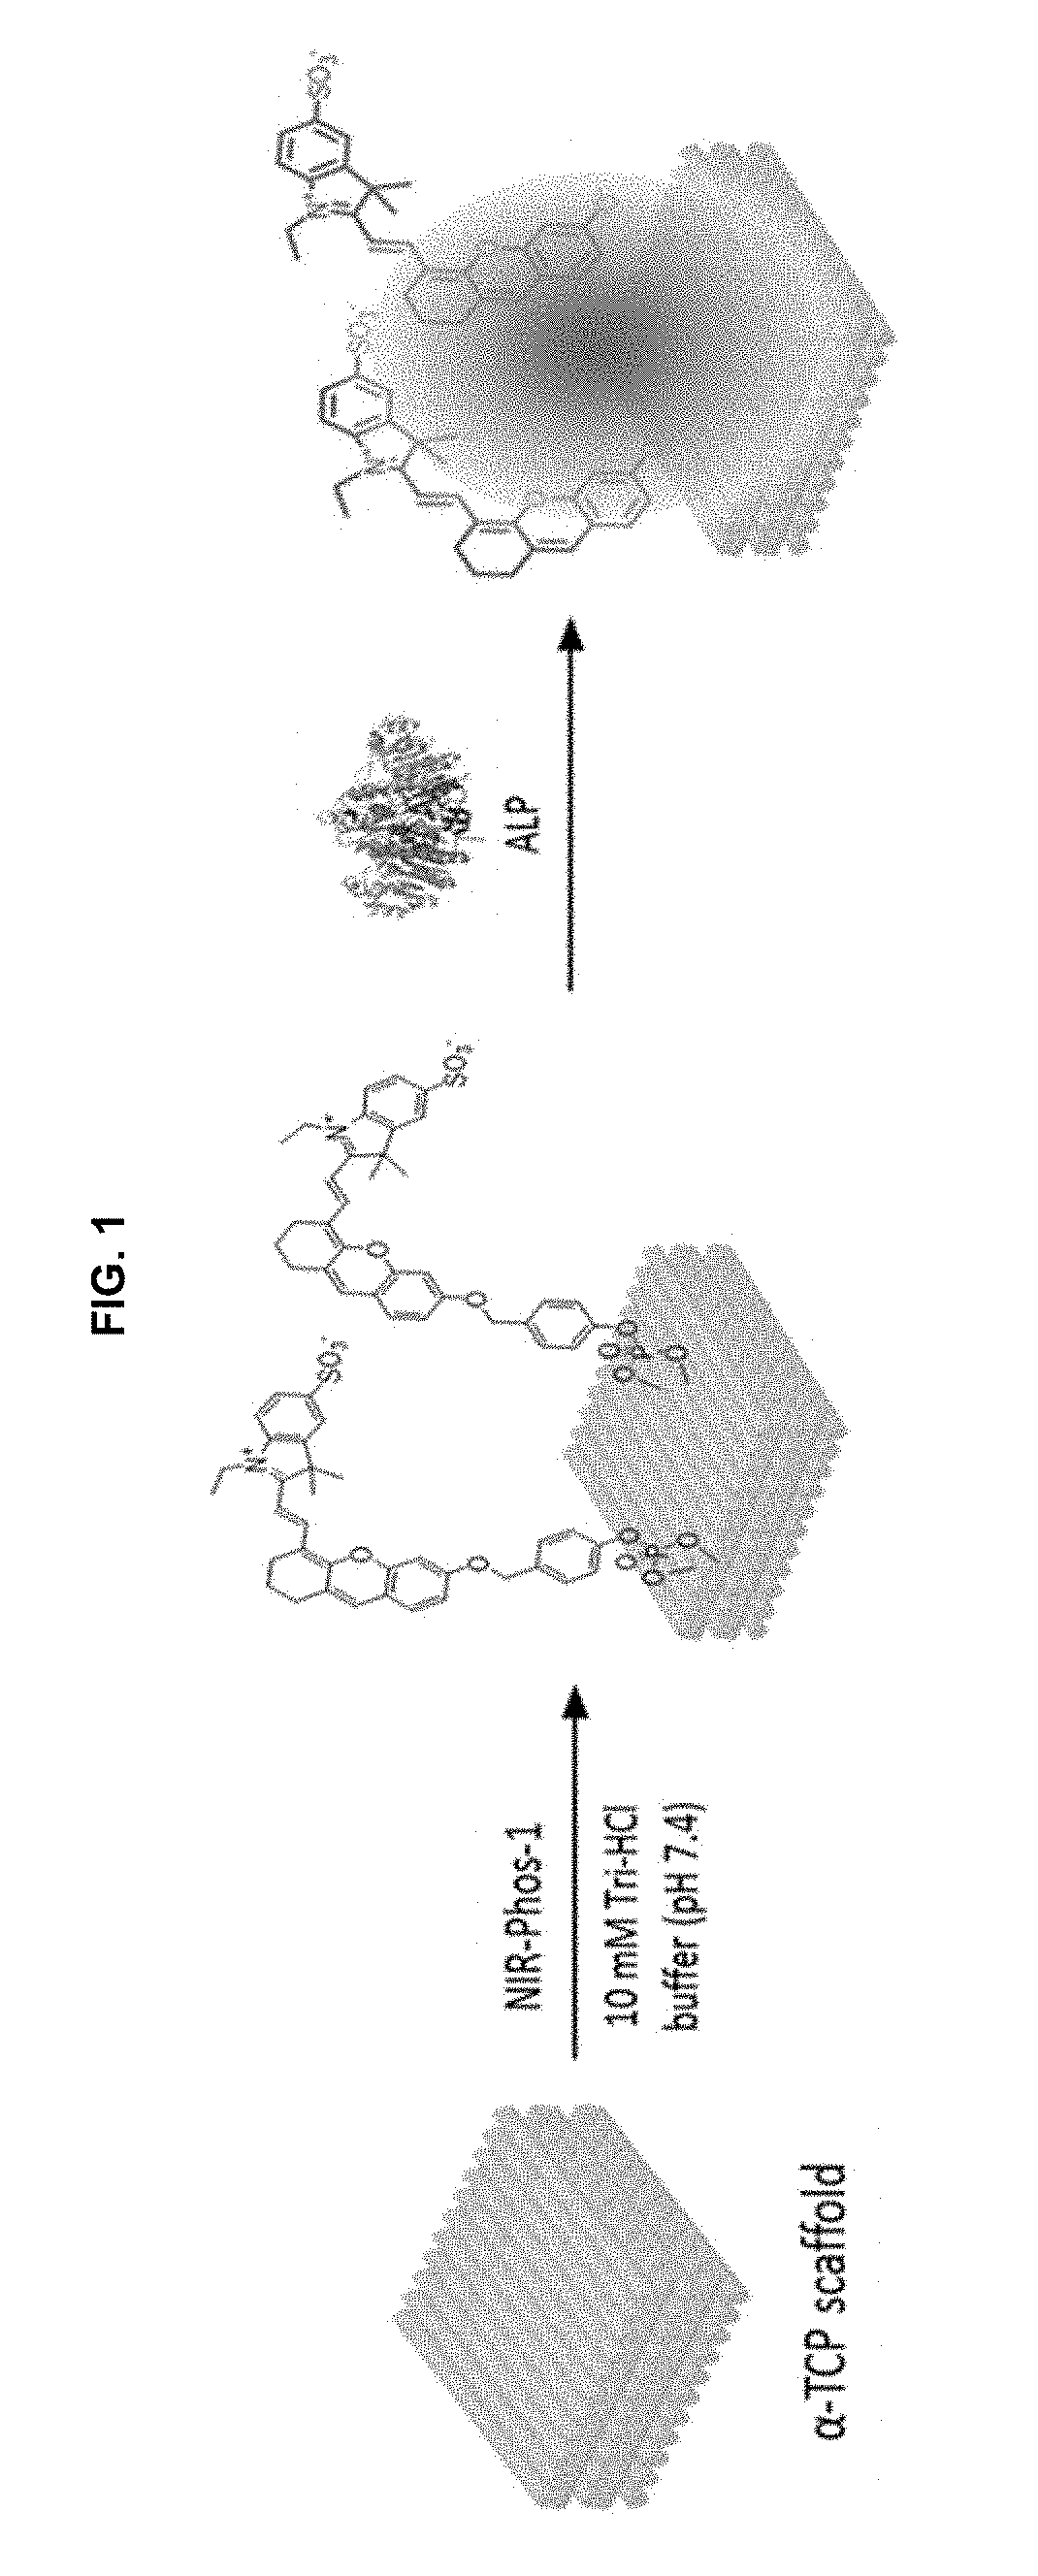 Near-infrared fluorescent probe for detecting alkaline phosphatase and manufacturing method thereof